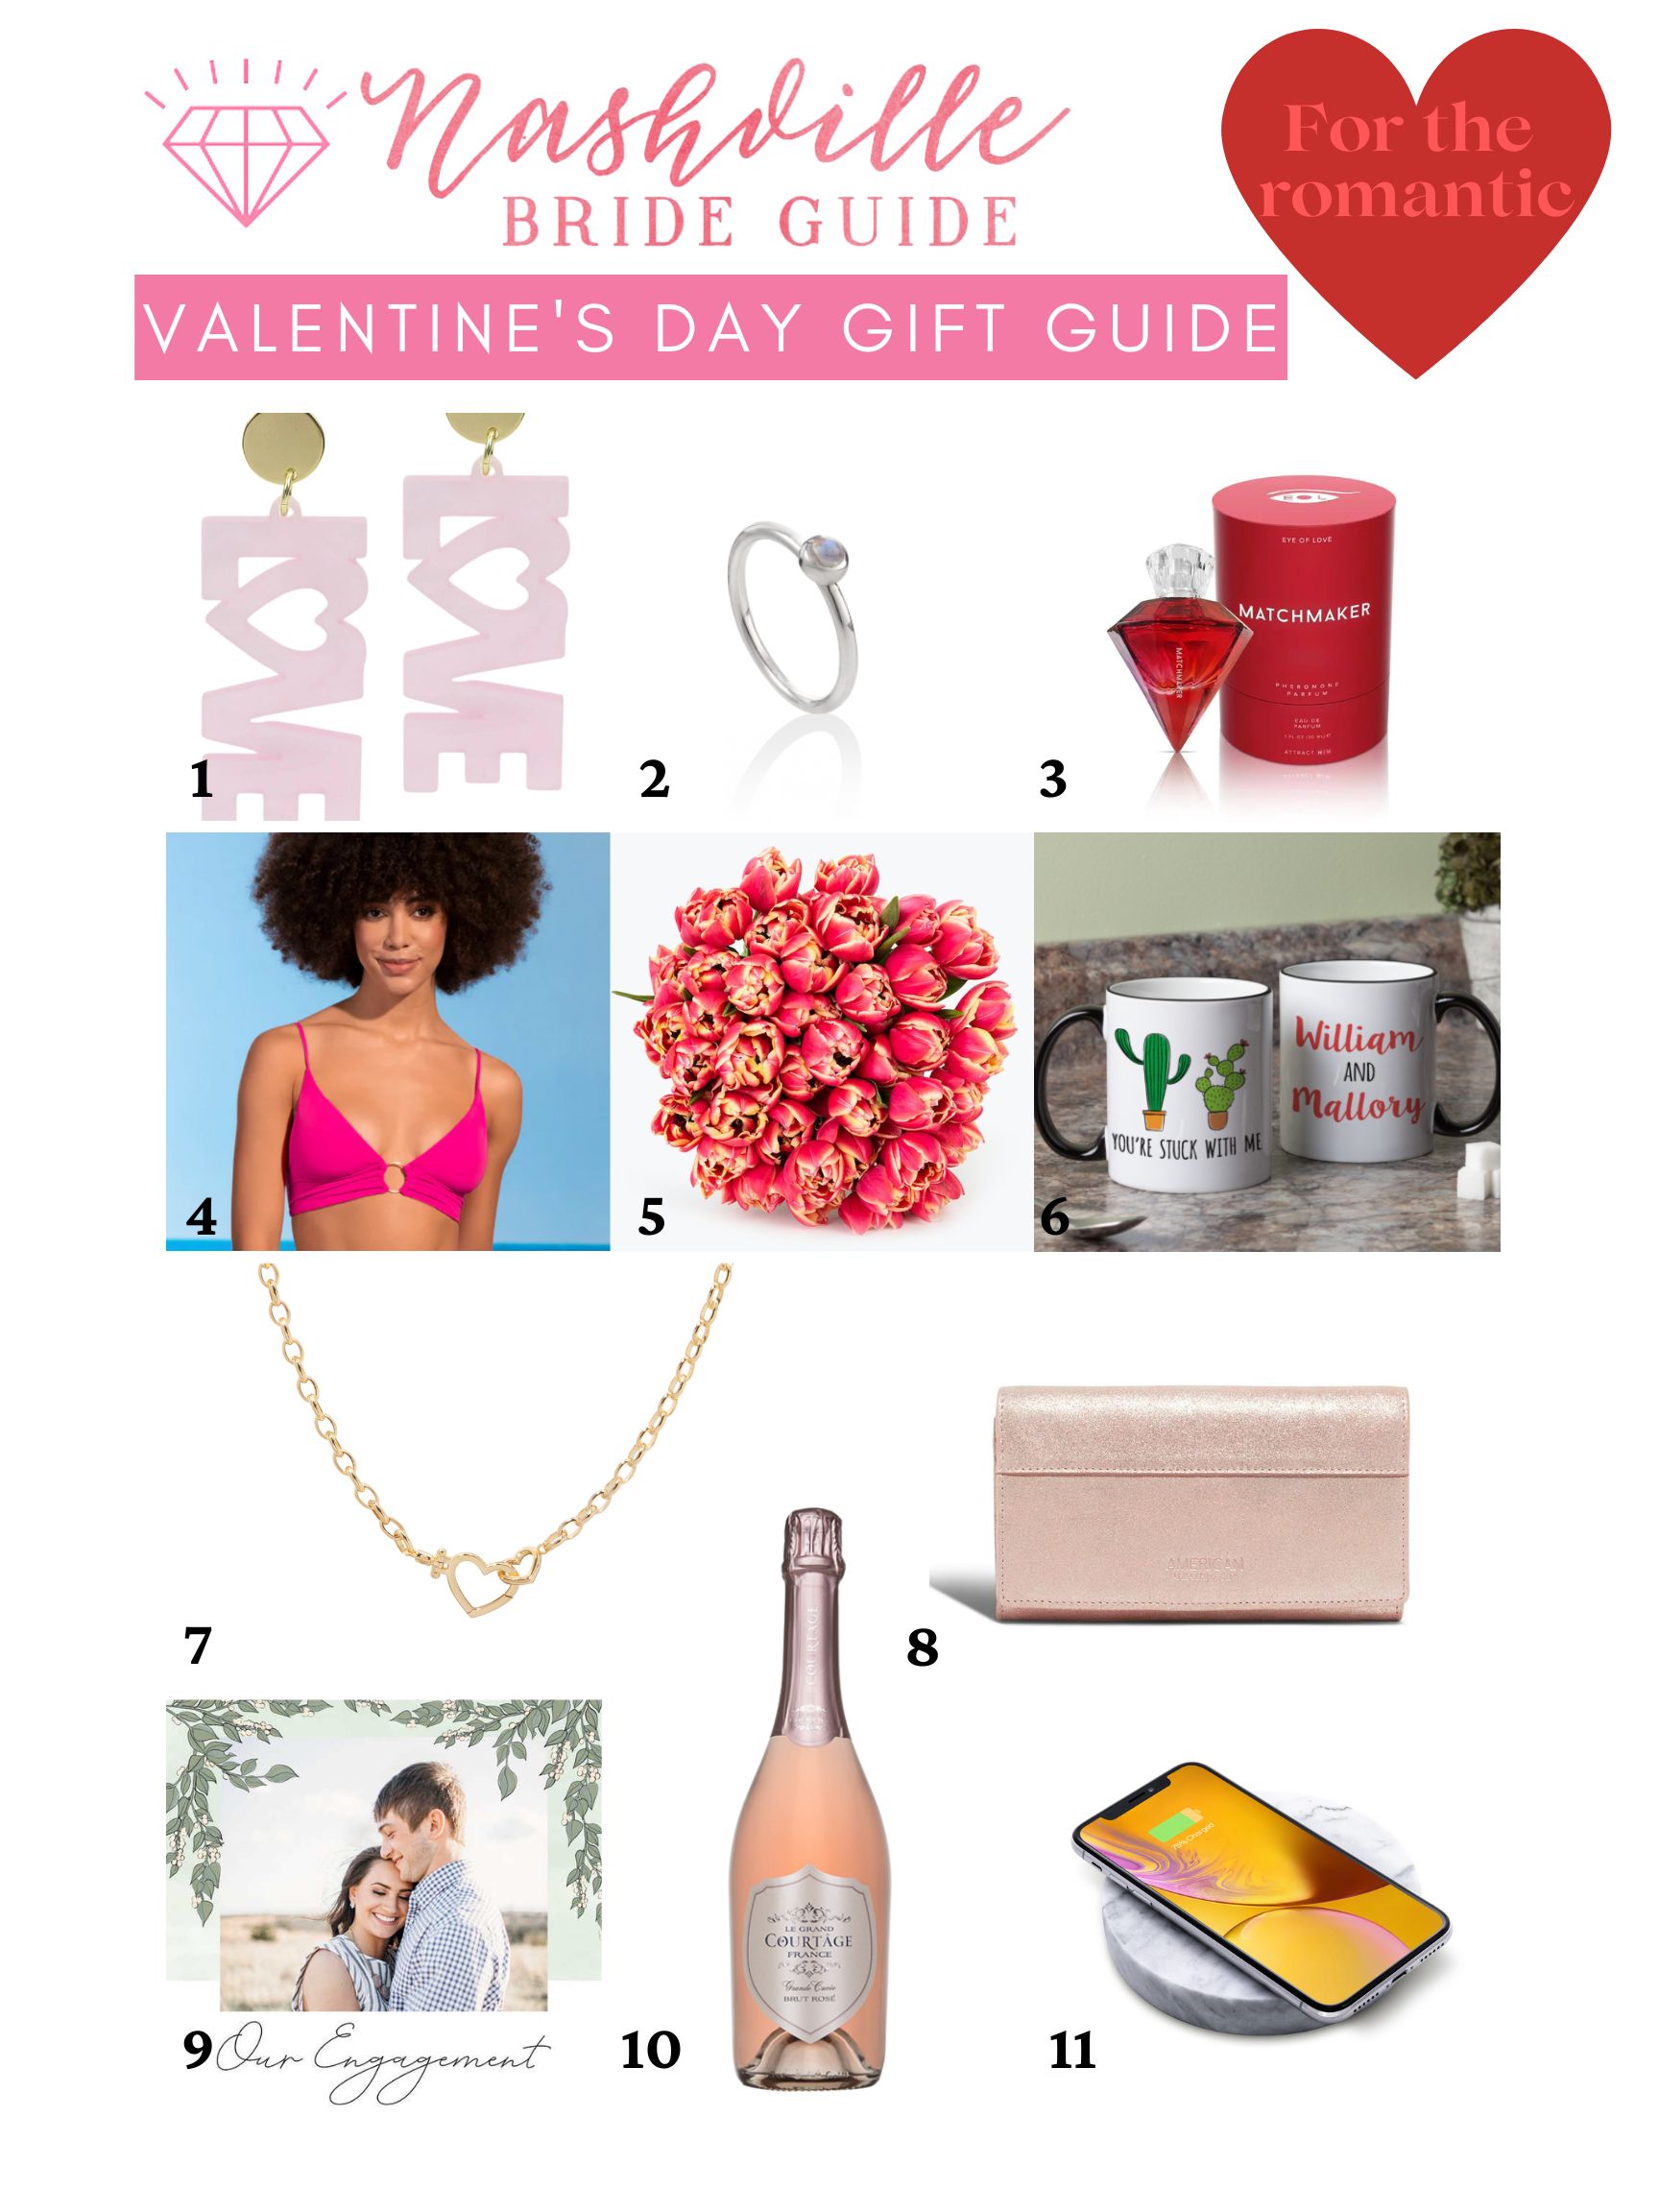 Valentine’s Day Gift Ideas for the Romantic